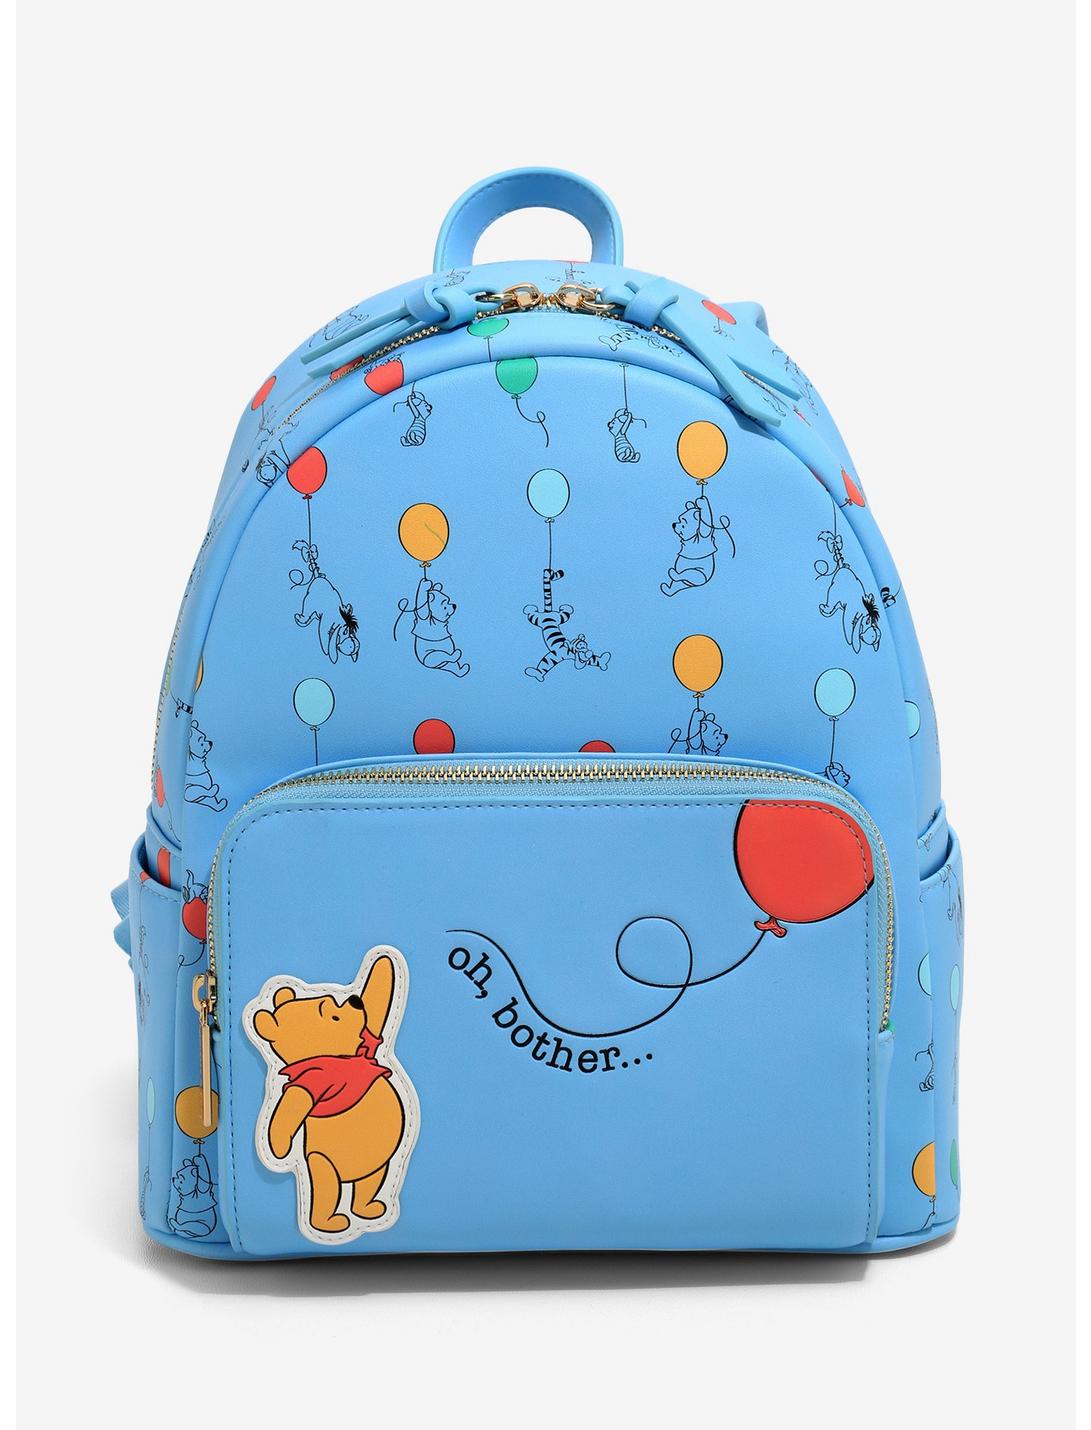 Danielle Nicole Disney Winnie the Pooh Balloons Mini Backpack - BoxLunch Exclusive, , hi-res